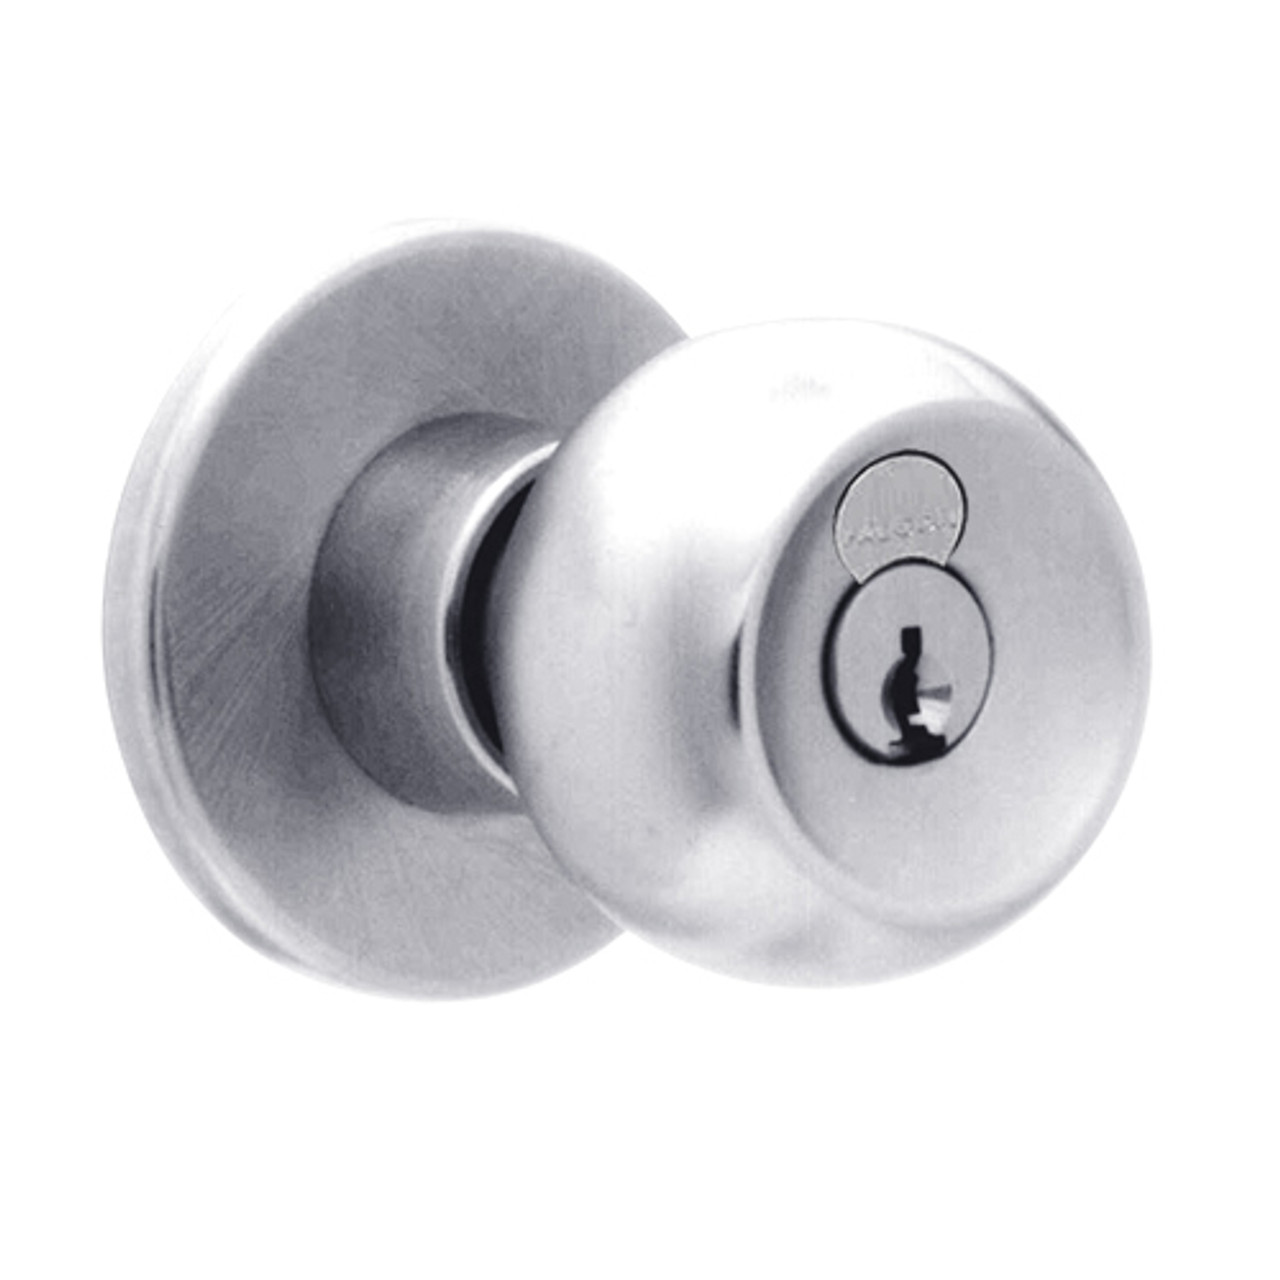 X571GD-TG-625 Falcon X Series Cylindrical Dormitory Lock with Troy-Gala Knob Style in Bright Chrome Finish